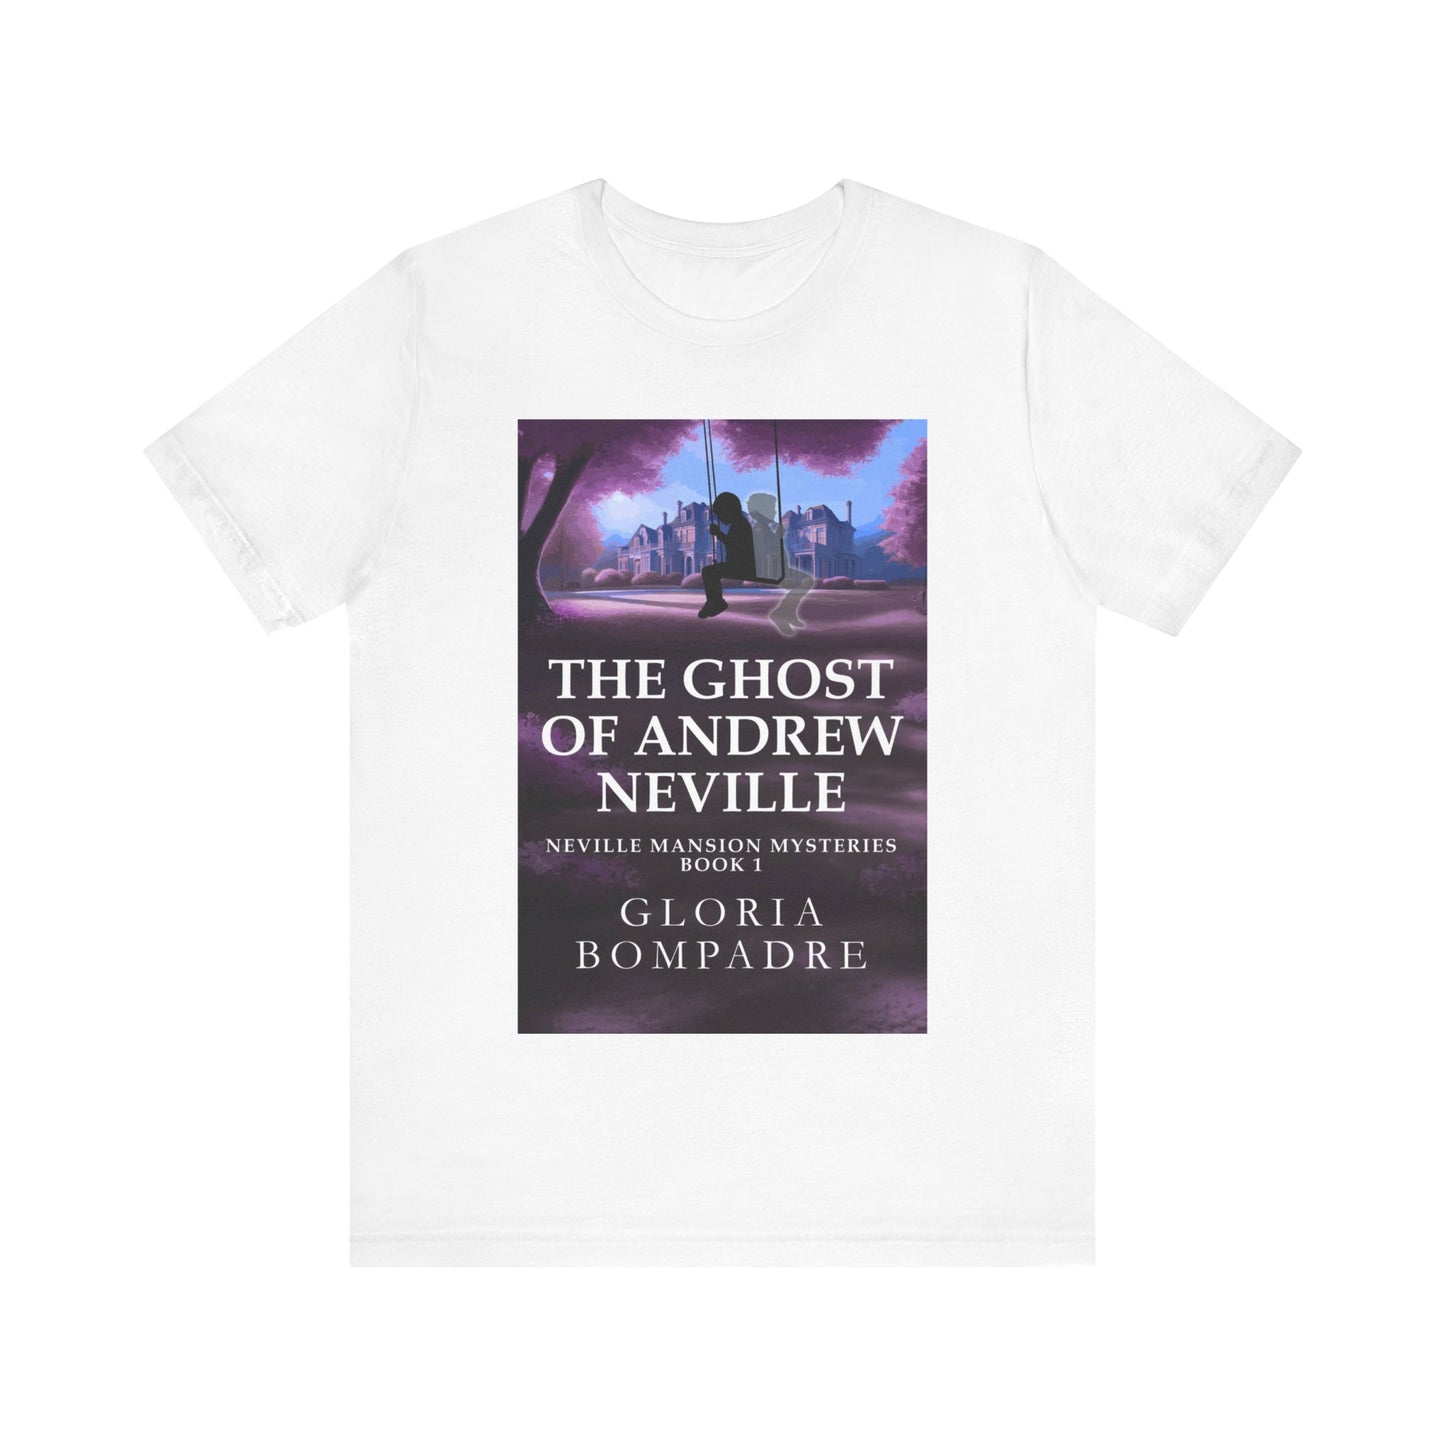 The Ghost of Andrew Neville - Unisex Jersey Short Sleeve T-Shirt